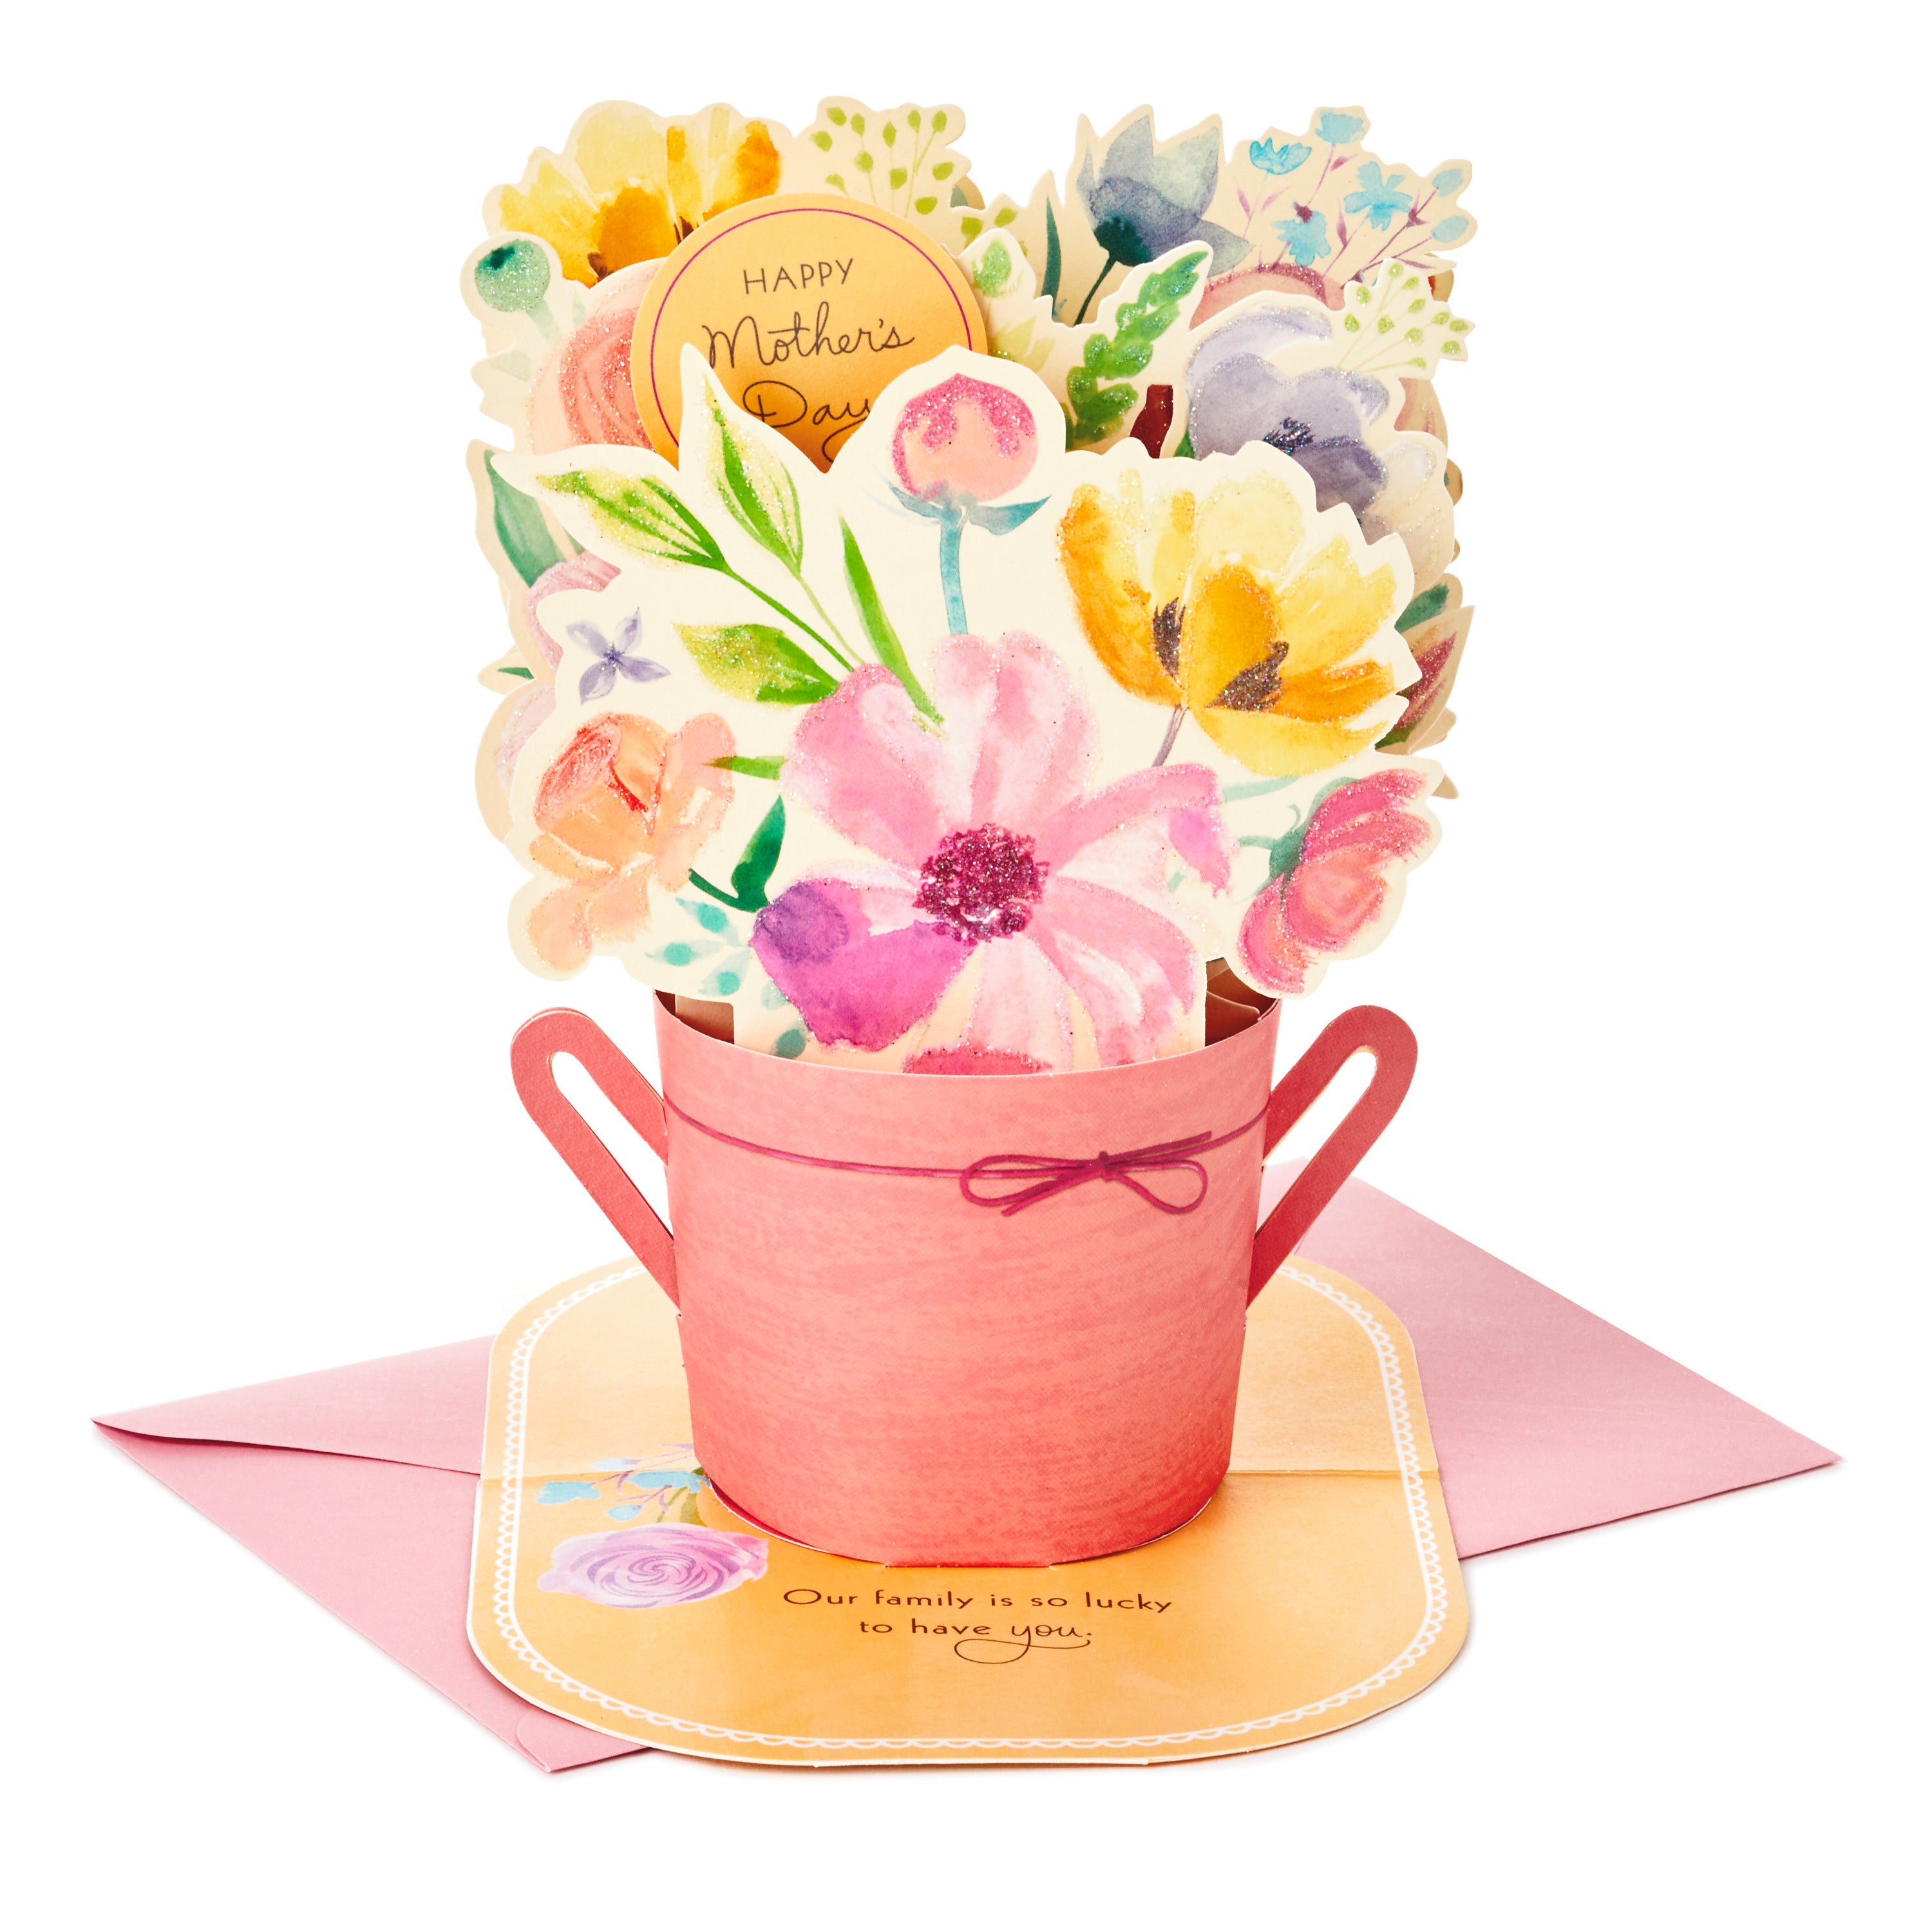 Paper Wonder Mothers Day Pop Up Card for Mom (Pink Flower Bouquet, You're the Best)